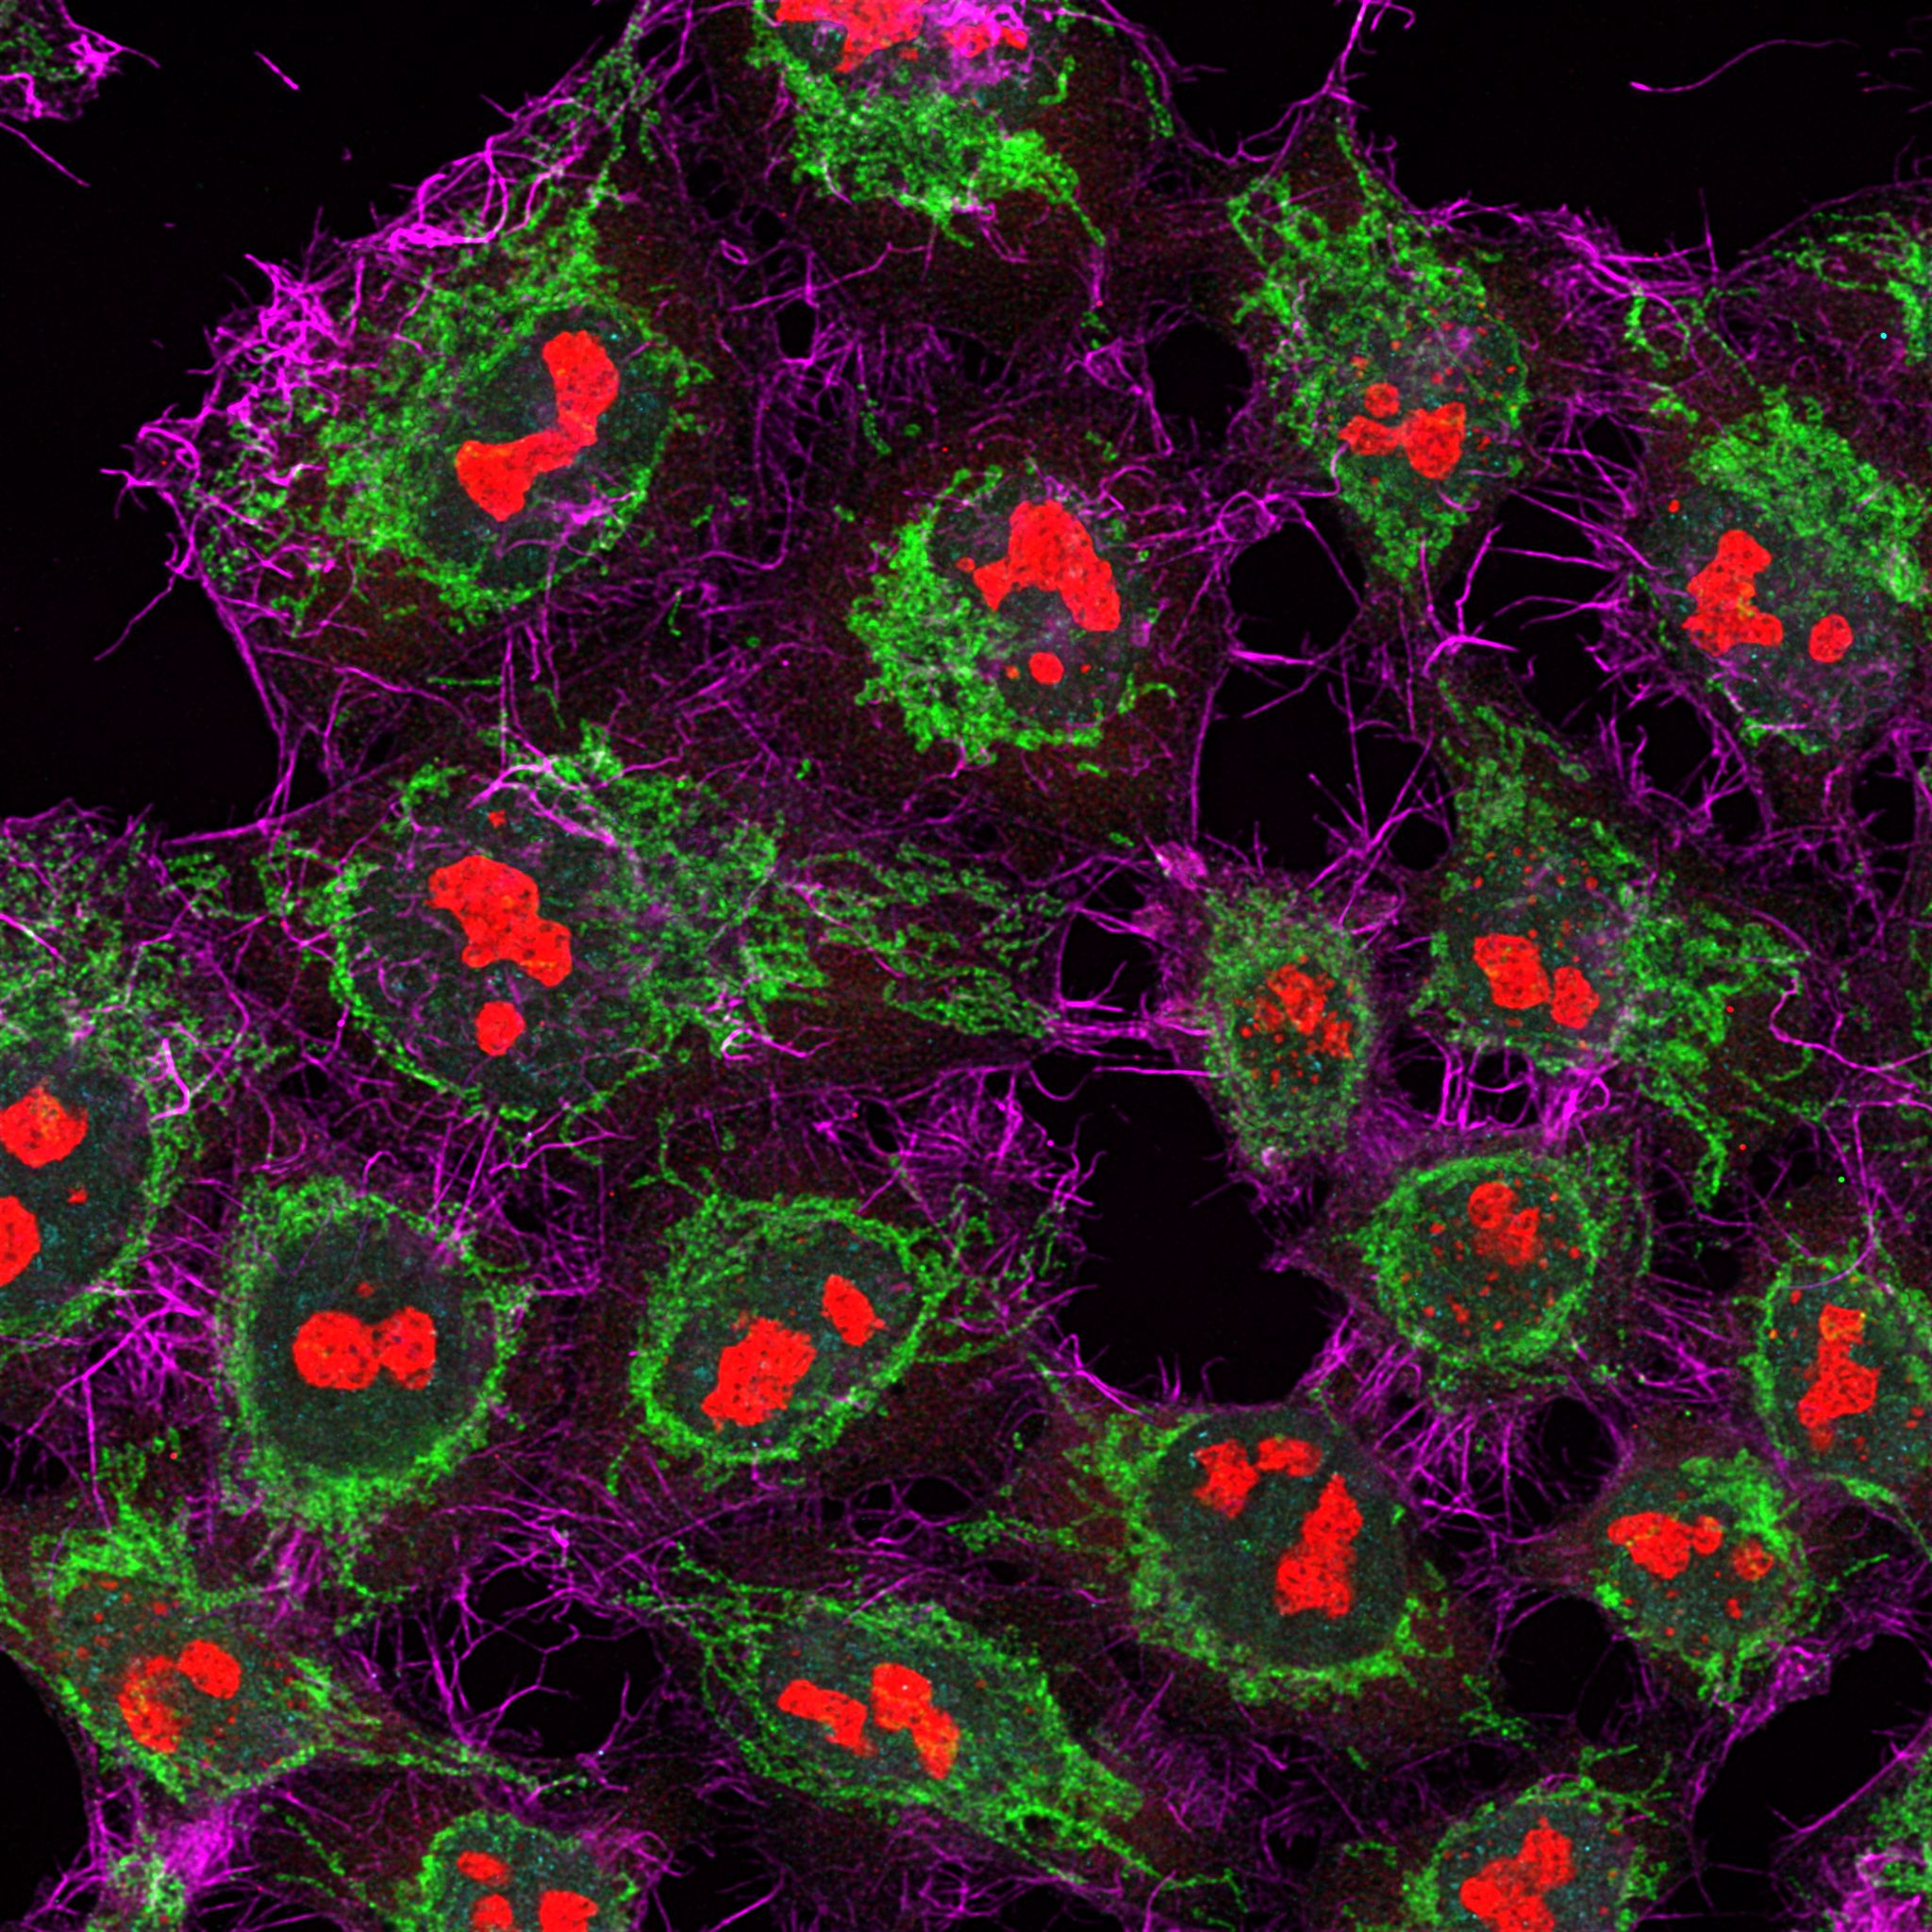 Immunofluorescence of HeLa: PFA-fixed HeLa cells were stained with anti-TOM70 (14528-1-AP) labeled with FlexAble CoraLite® Plus 488 Kit (KFA001, green), anti-GNL3 (67169-1-lg) labeled with FlexAble CoraLite® Plus 555 Kit (KFA042, red) and anti-Actin labeled with FlexAble CoraLite® Plus 647 Kit (KFA043, magenta). Cell nuclei are in cyan.
Confocal images were acquired with a 100x oil objective and post-processed. Images were recorded at the Core Facility Bioimaging at the Biomedical Center, LMU Munich.